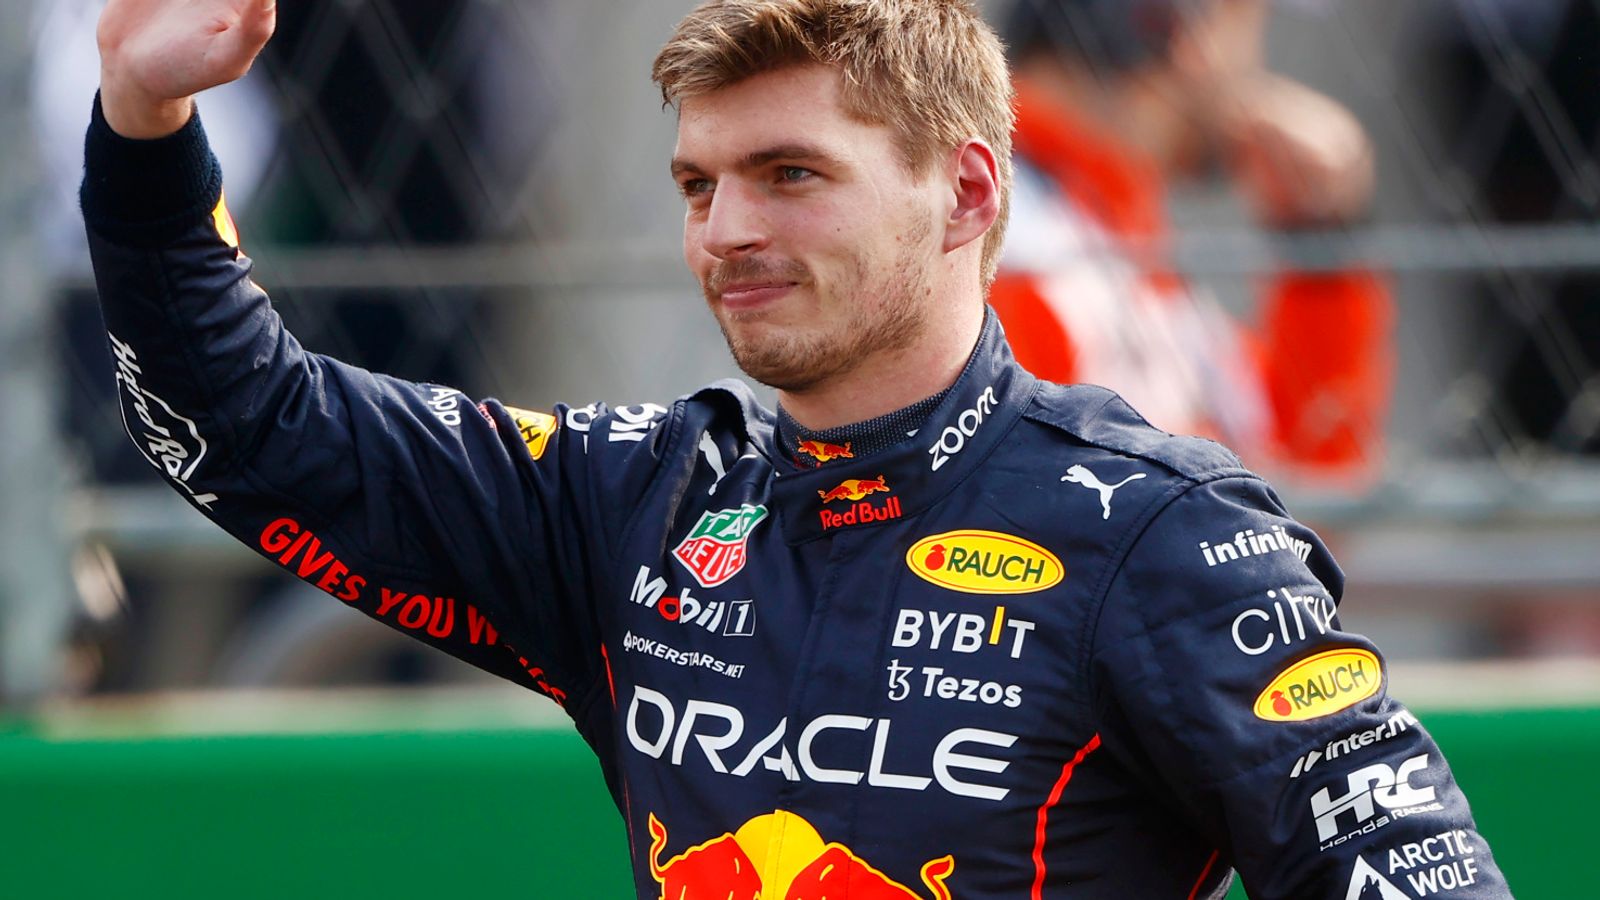 Mexico City GP: Max Verstappen sees off strong Mercedes challenge to take pole